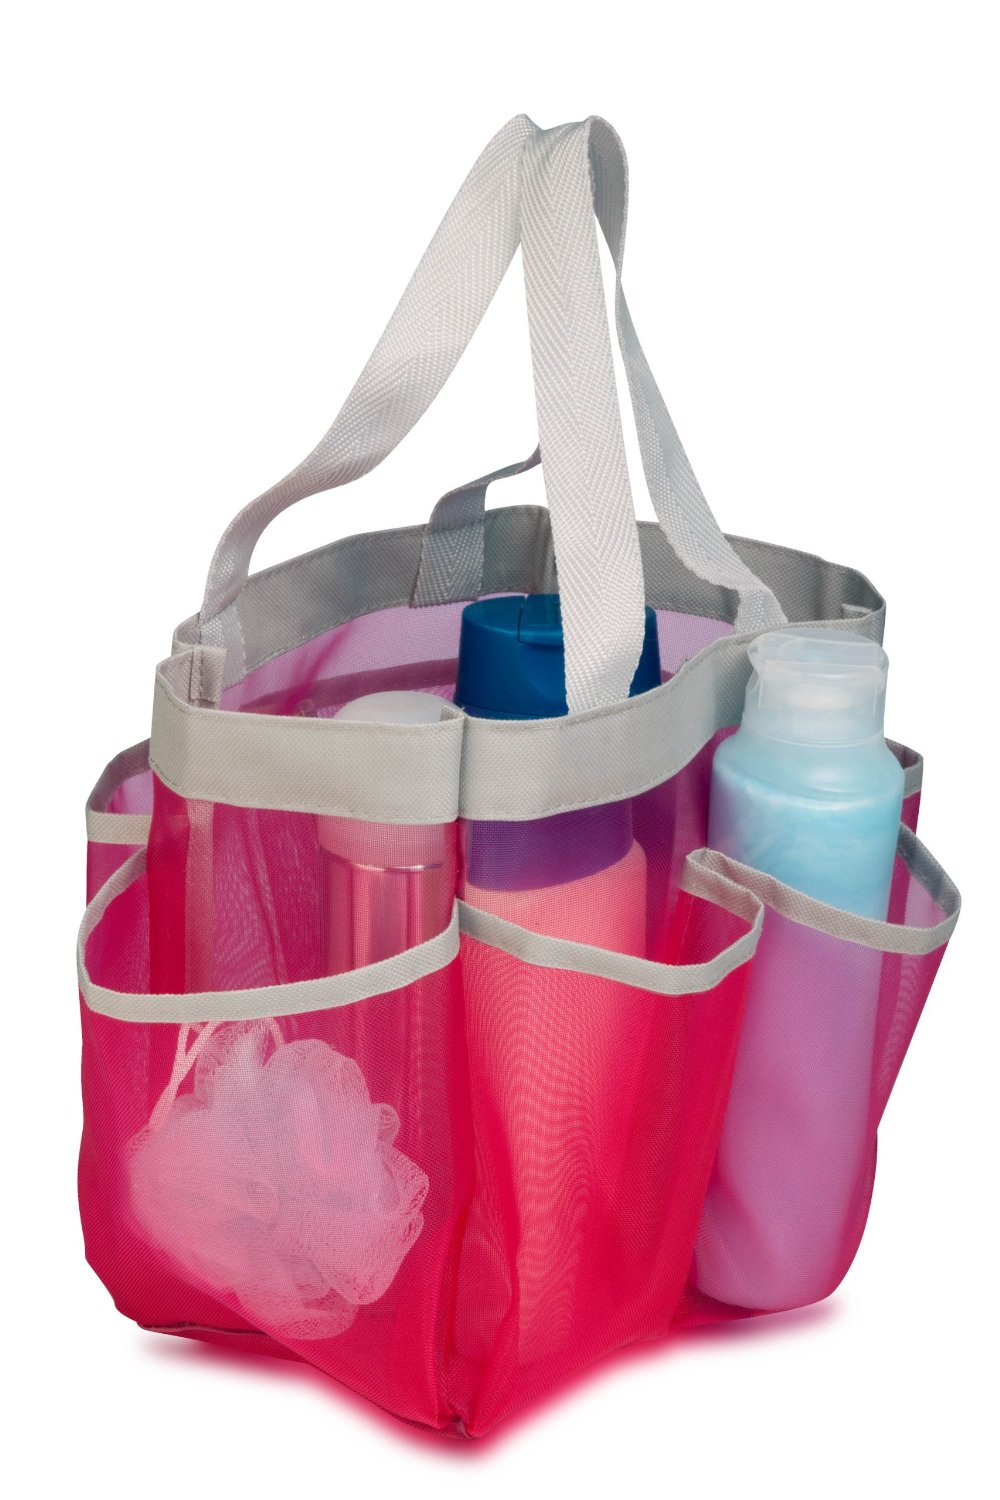 Honey-Can-Do Quick Dry 7-Pocket Shower Tote in Pink – Just $6.60!